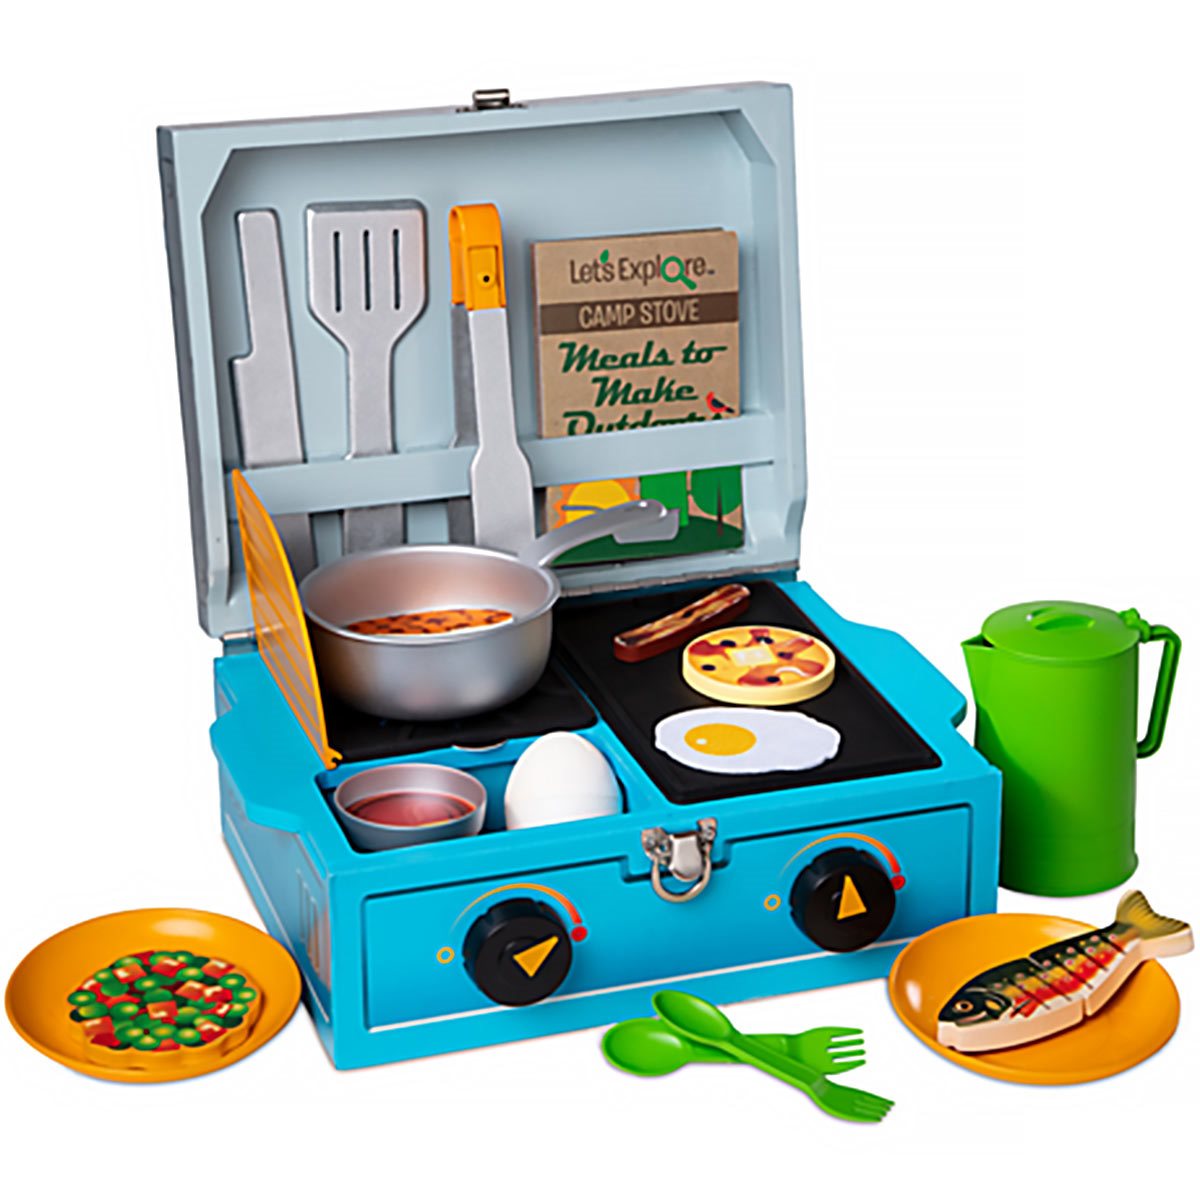 Let's Explore Camp Stove Play Set   Entertainment Earth